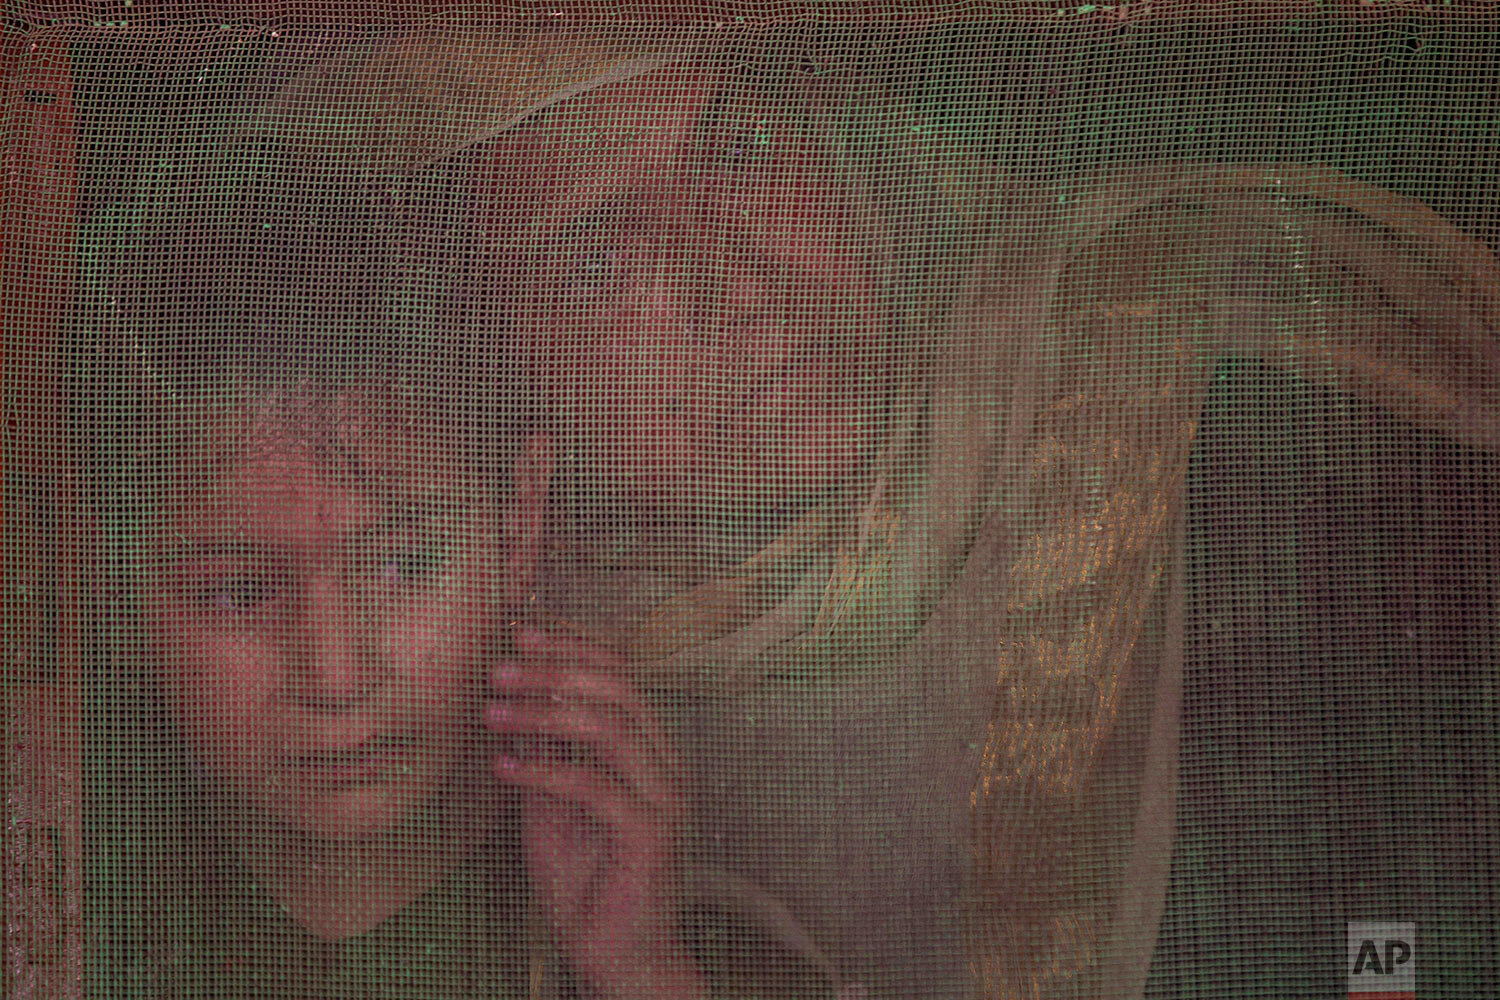  A Kashmiri woman and a child watch from behind a window mesh the funeral of Waseem Ahmed, a policeman who was killed in a shootout, on the outskirts of Srinagar, Indian controlled Kashmir, Sunday, June 13, 2021. (AP Photo/Dar Yasin) 